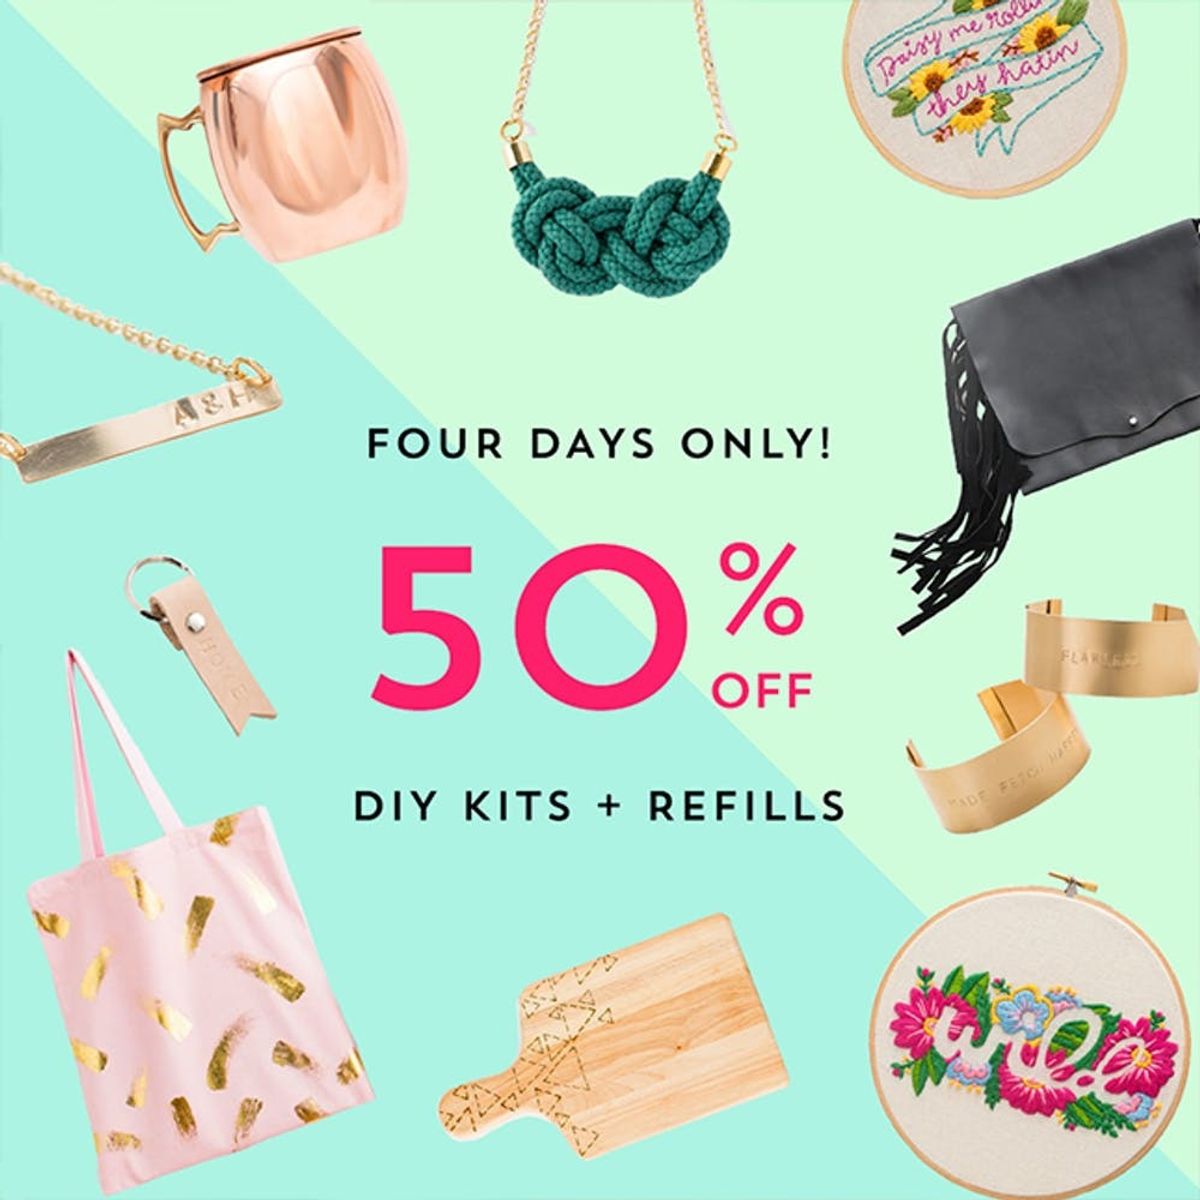 Get ‘Em Before They’re Gone! 50% Off All DIY Kits in the Brit + Co Shop